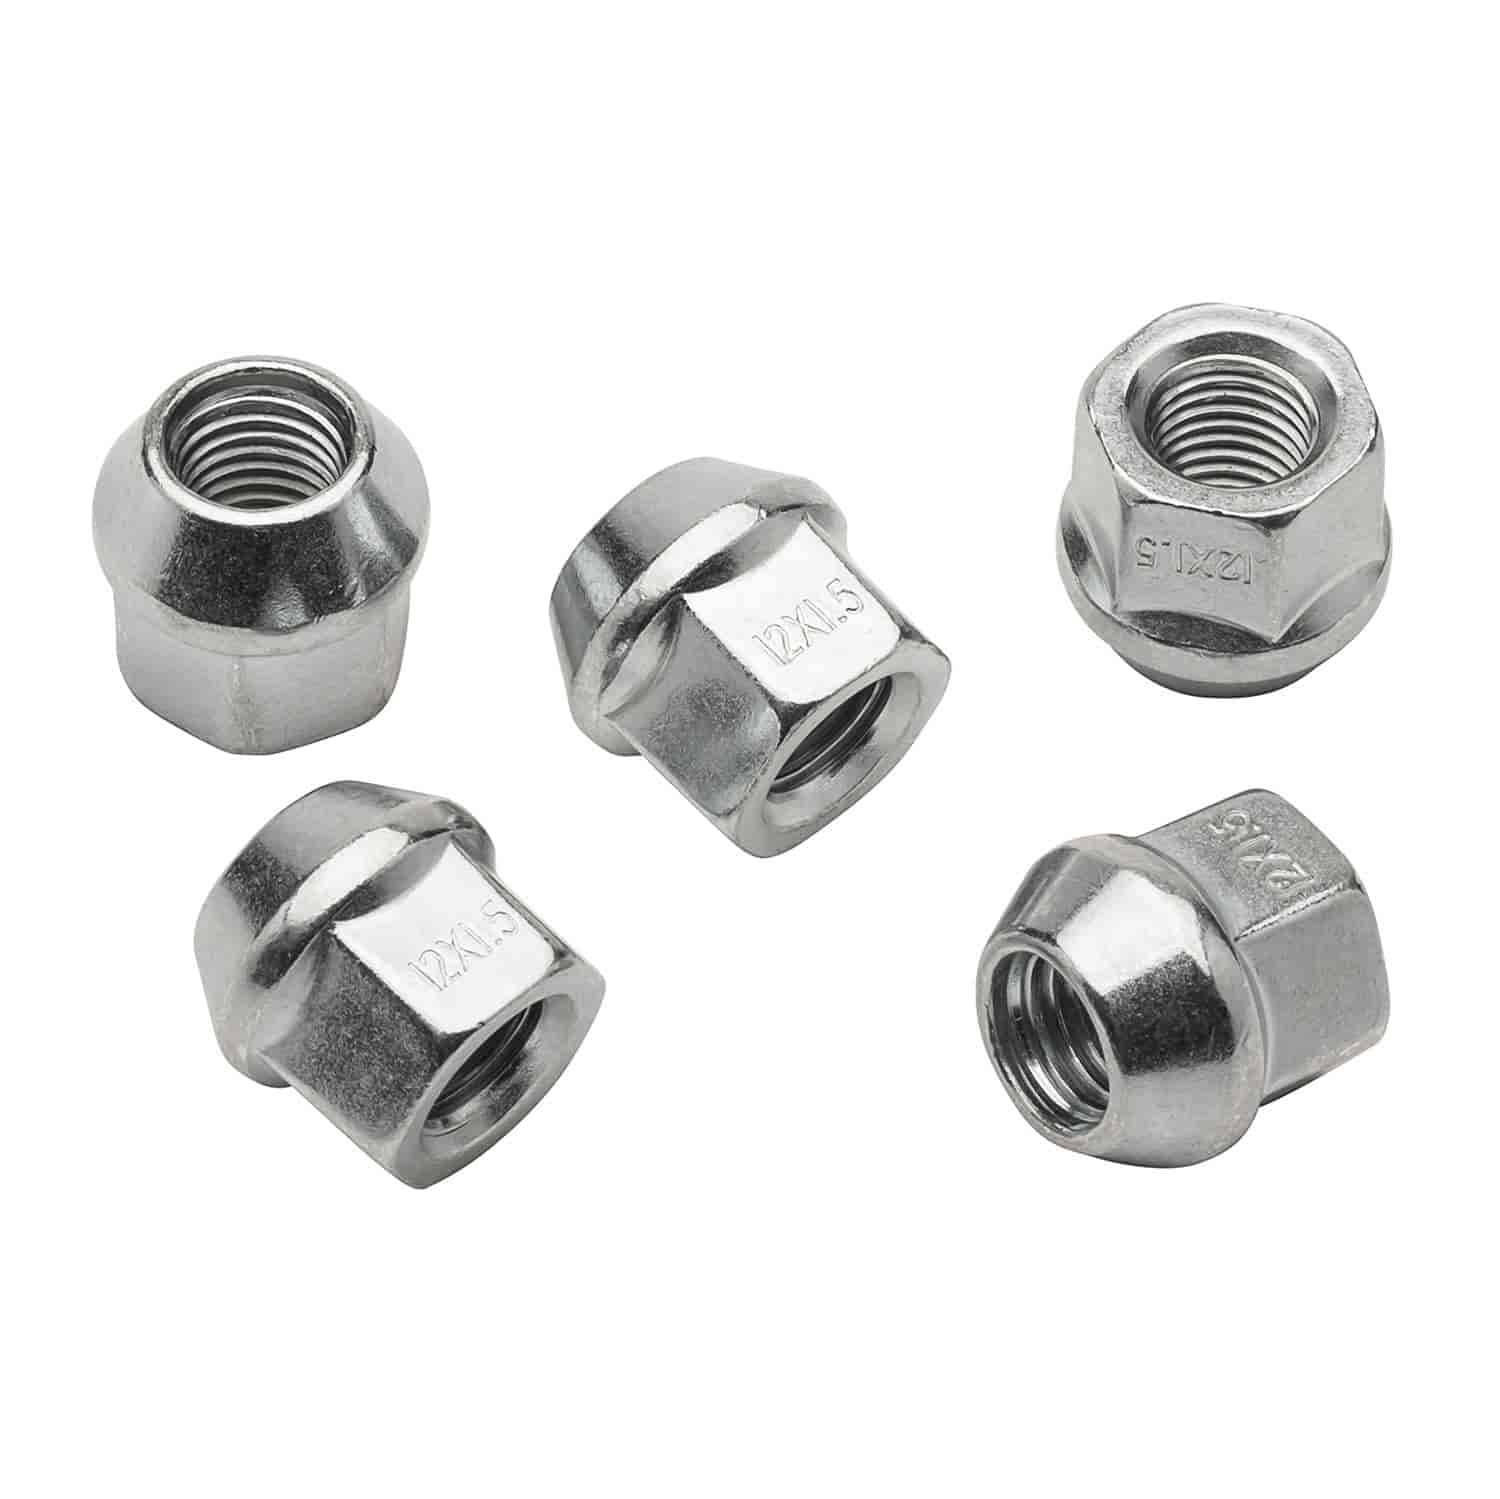 Acorn/Conical Seat Lug Nuts 12mm-1.5" Open End